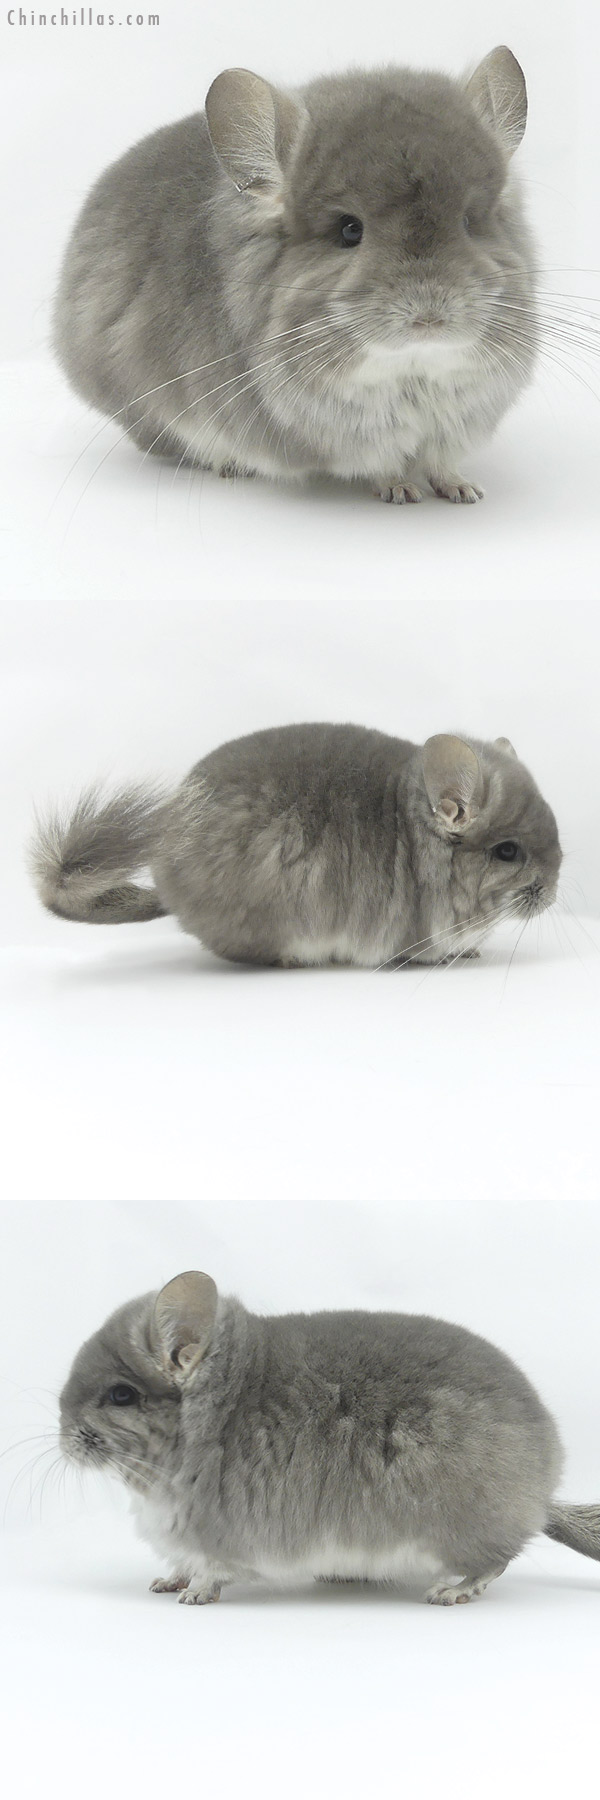 Chinchilla or related item offered for sale or export on Chinchillas.com - 19490 Exceptional Violet  Royal Persian Angora Male Chinchilla